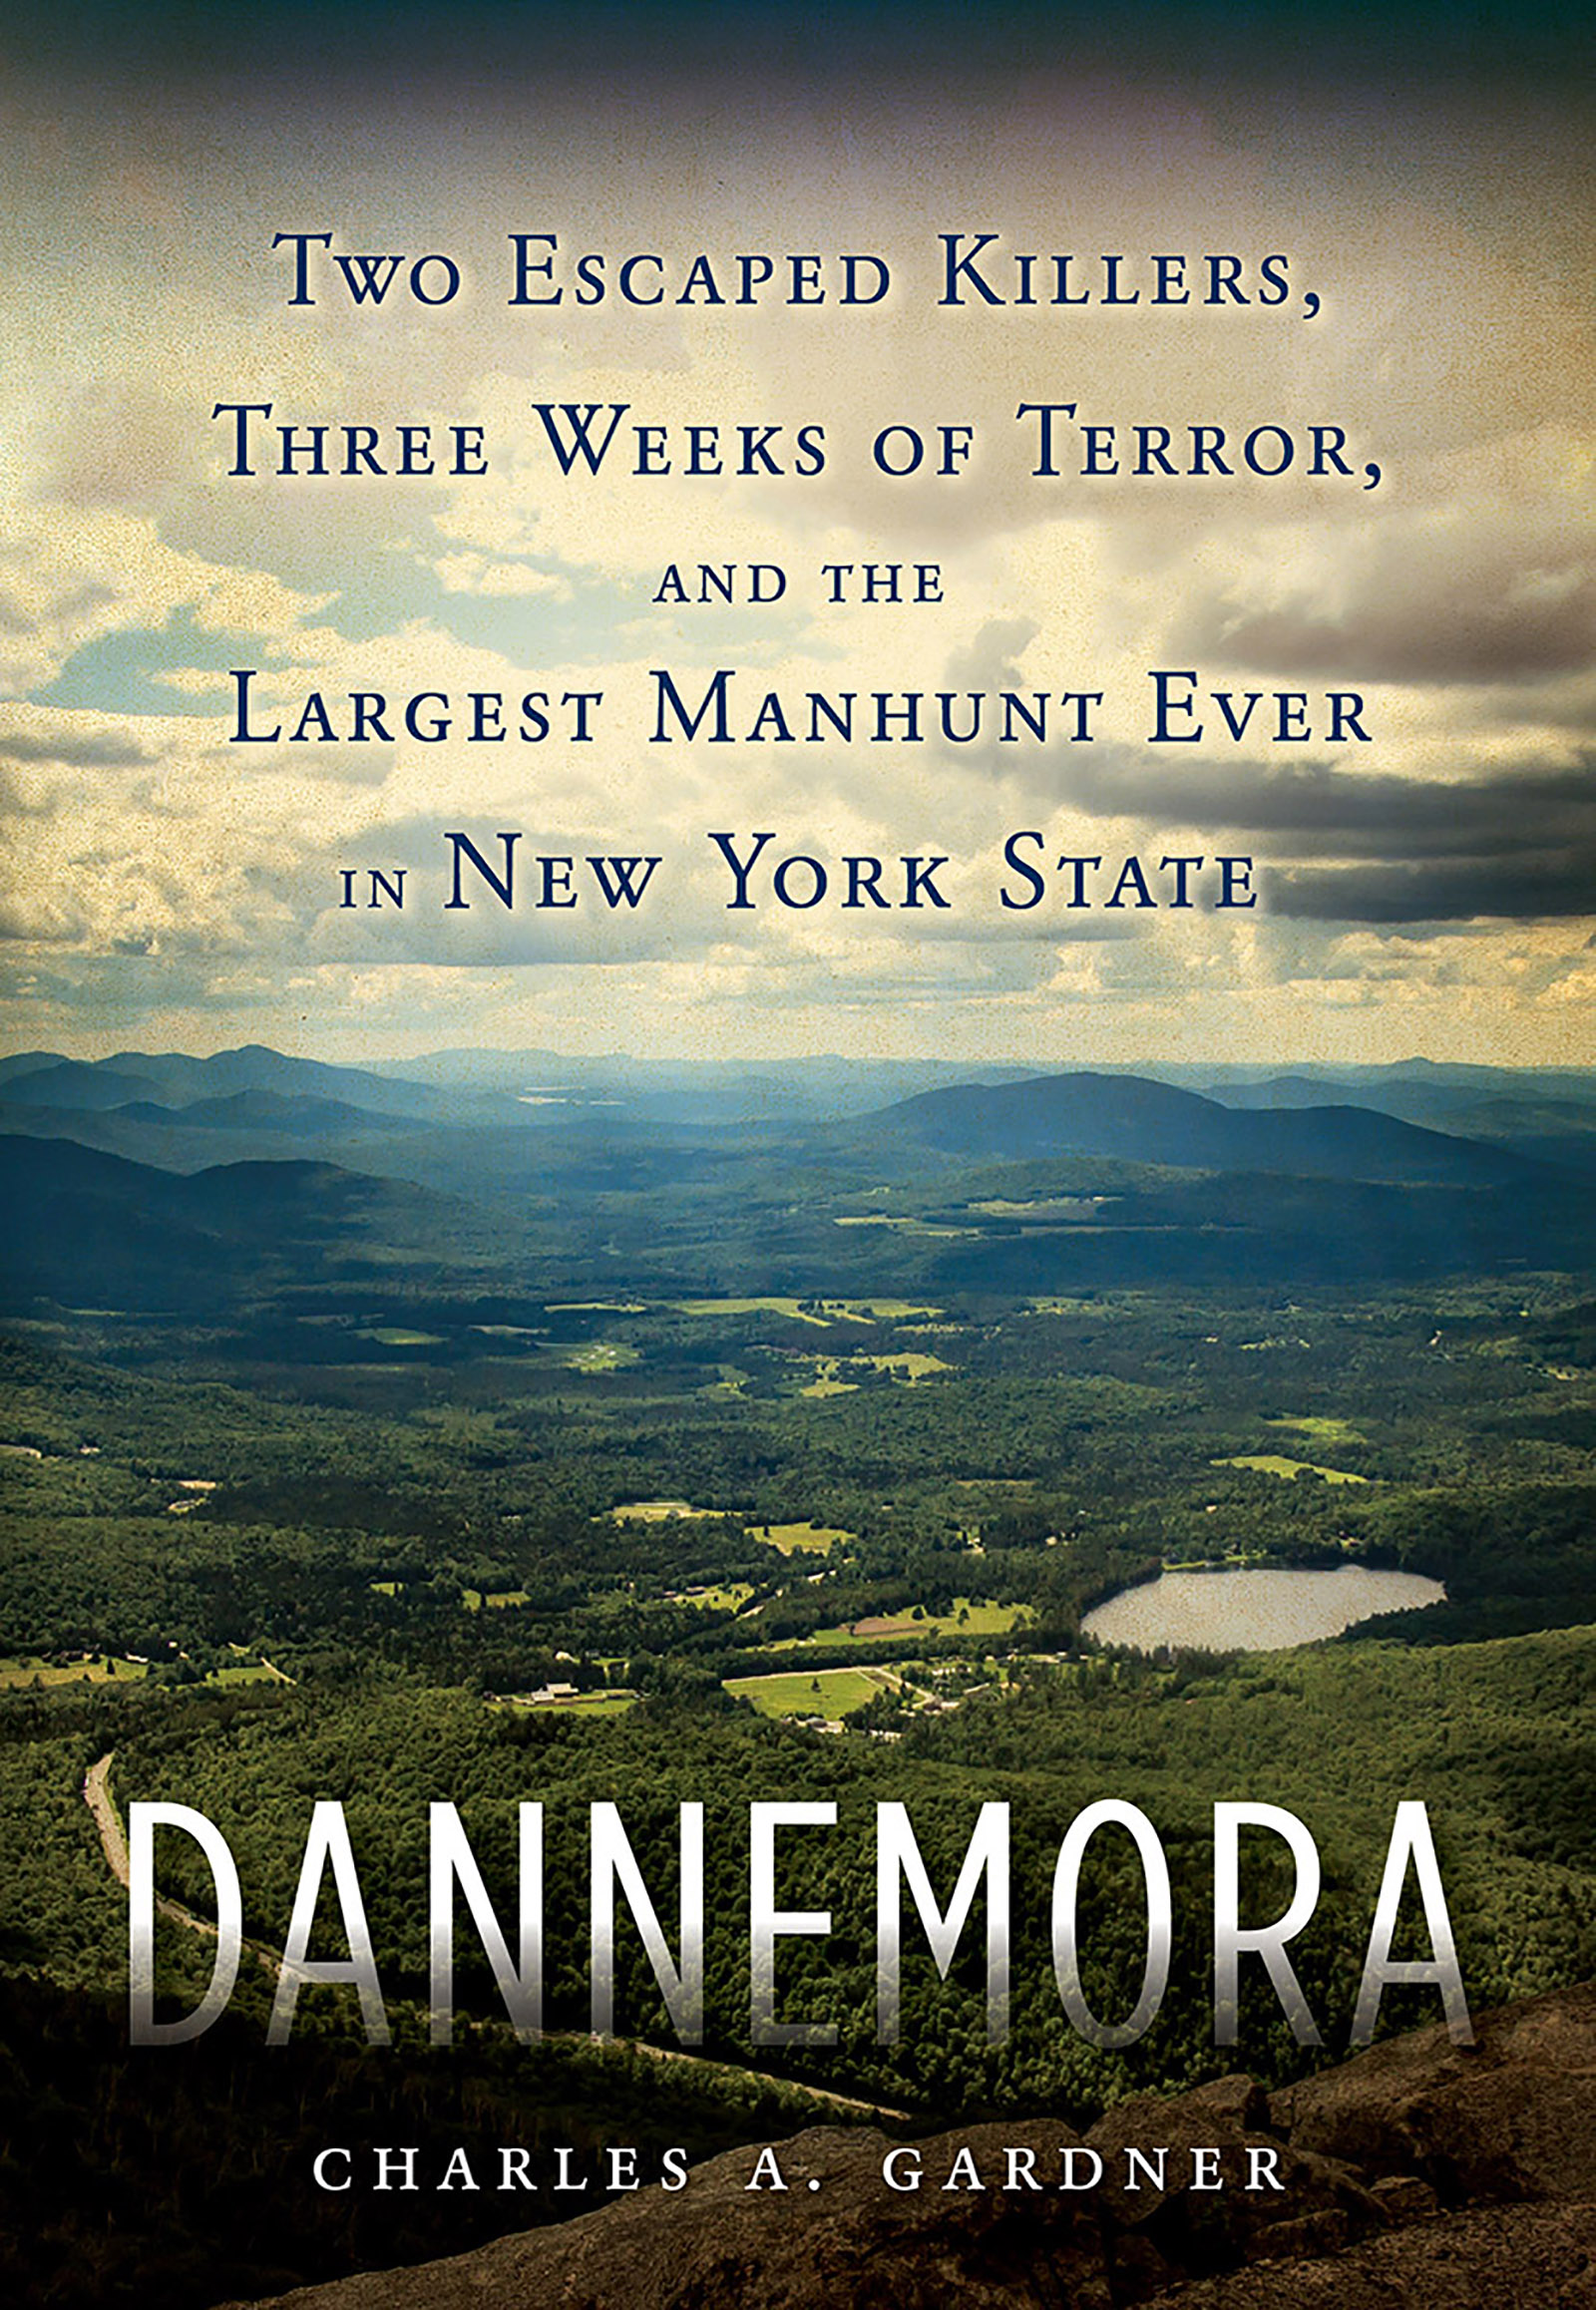 Imagen de portada para Dannemora [electronic resource] : Two Escaped Killers, Three Weeks of Terror, and the Largest Manhunt Ever in New York State